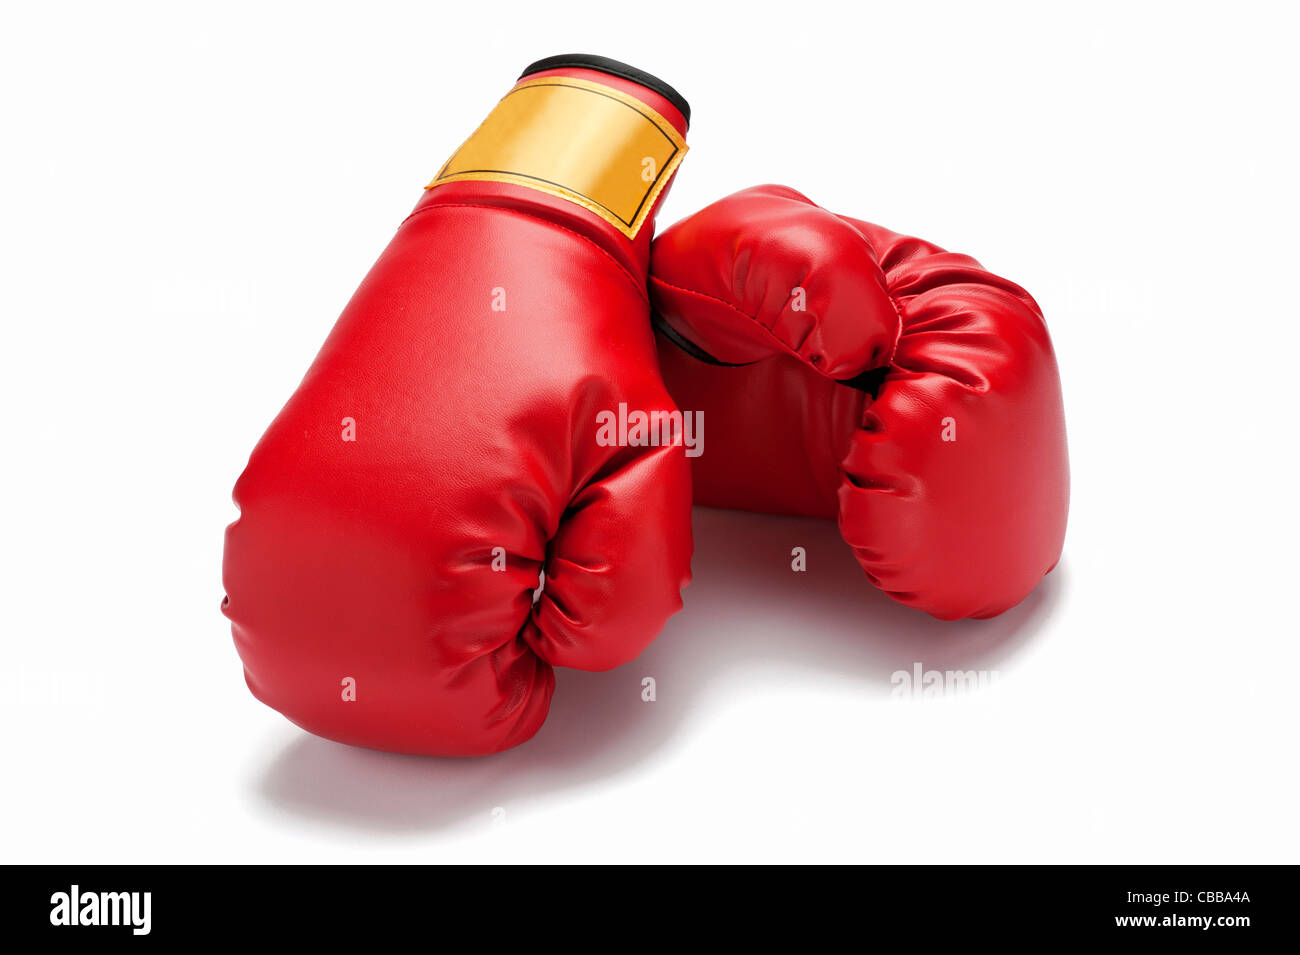 A pair of red boxing gloves Stock Photo